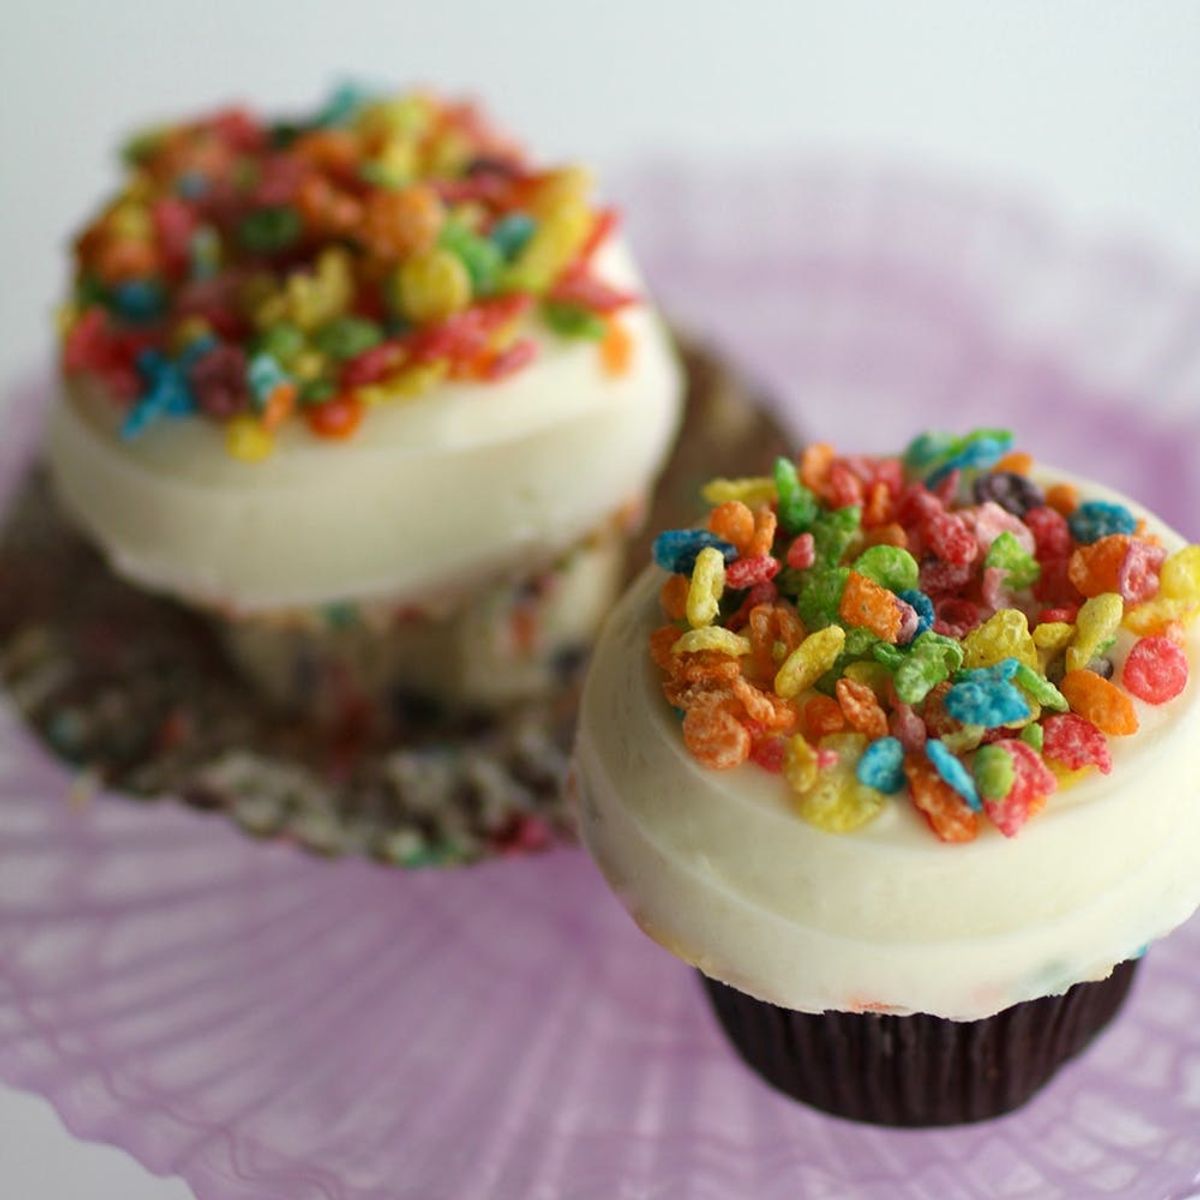 Sprinkles’ Latest Flavors Give You Permission to Eat Cupcakes for Breakfast